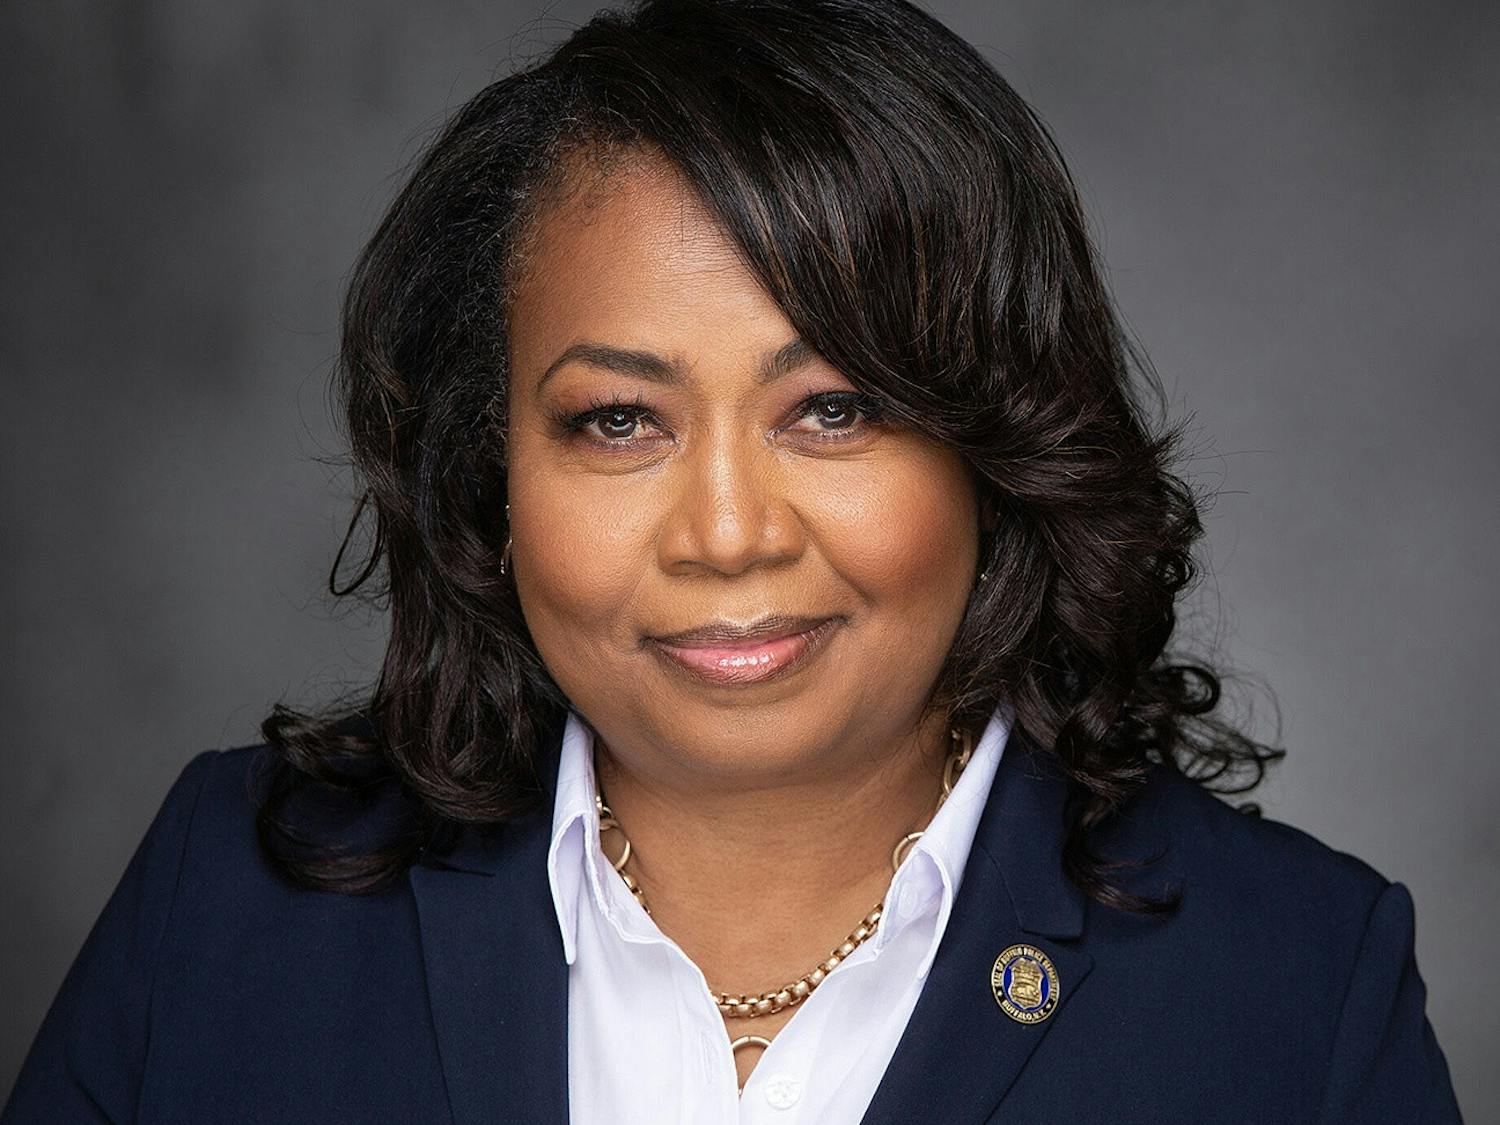 Beaty has served as a deputy commissioner of the Buffalo Police and the director of public safety at Canisius University.&nbsp;&nbsp;